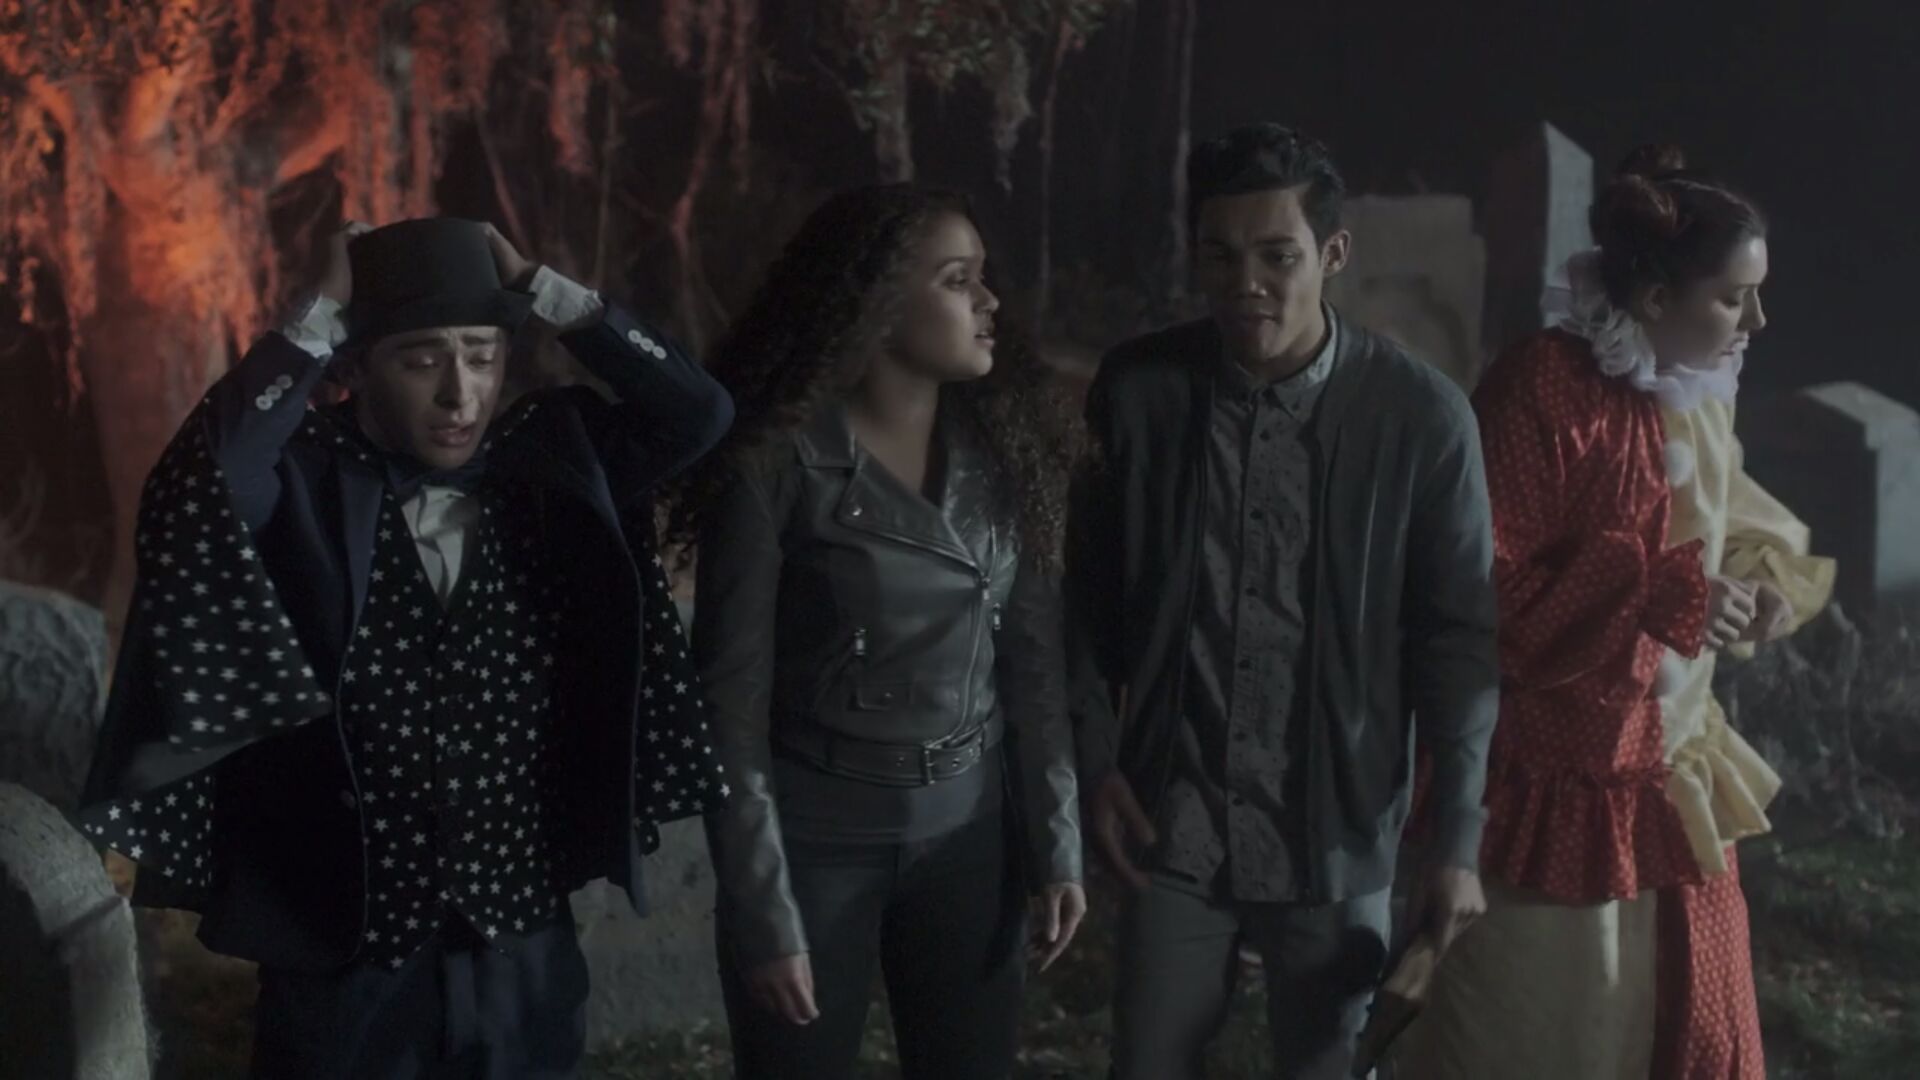 Madison Pettis in Mostly Ghostly: Have You Met My Ghoulfriend?